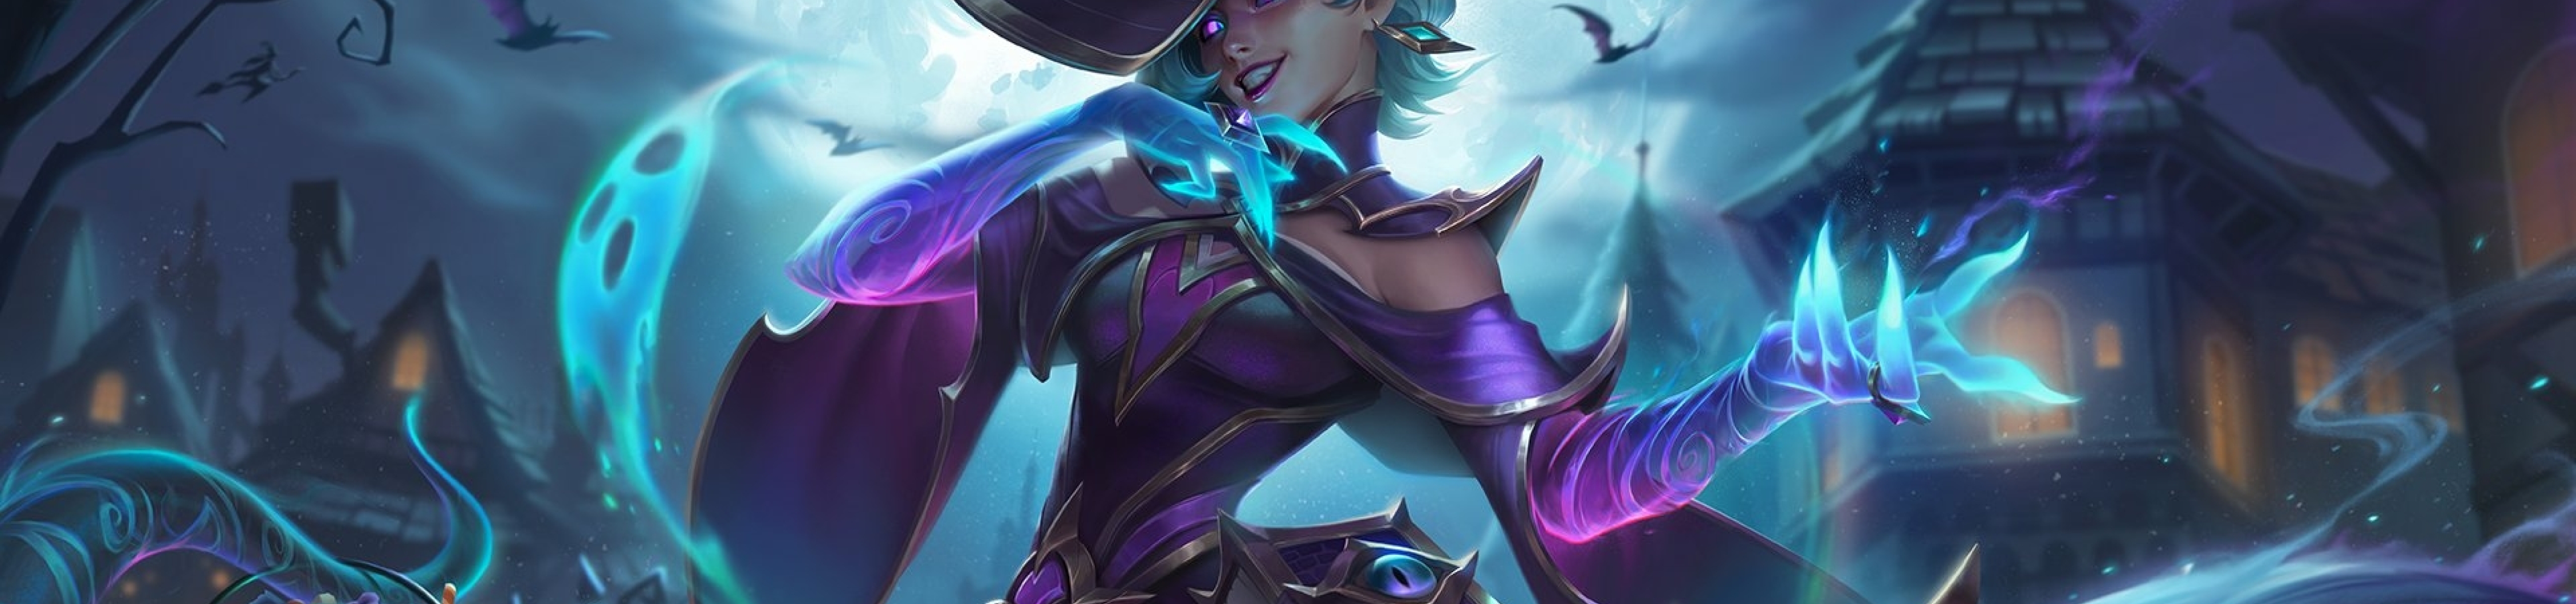 5120x1200 Bewitching Cassiopeia HD League Of Legends 5120x1200 ...